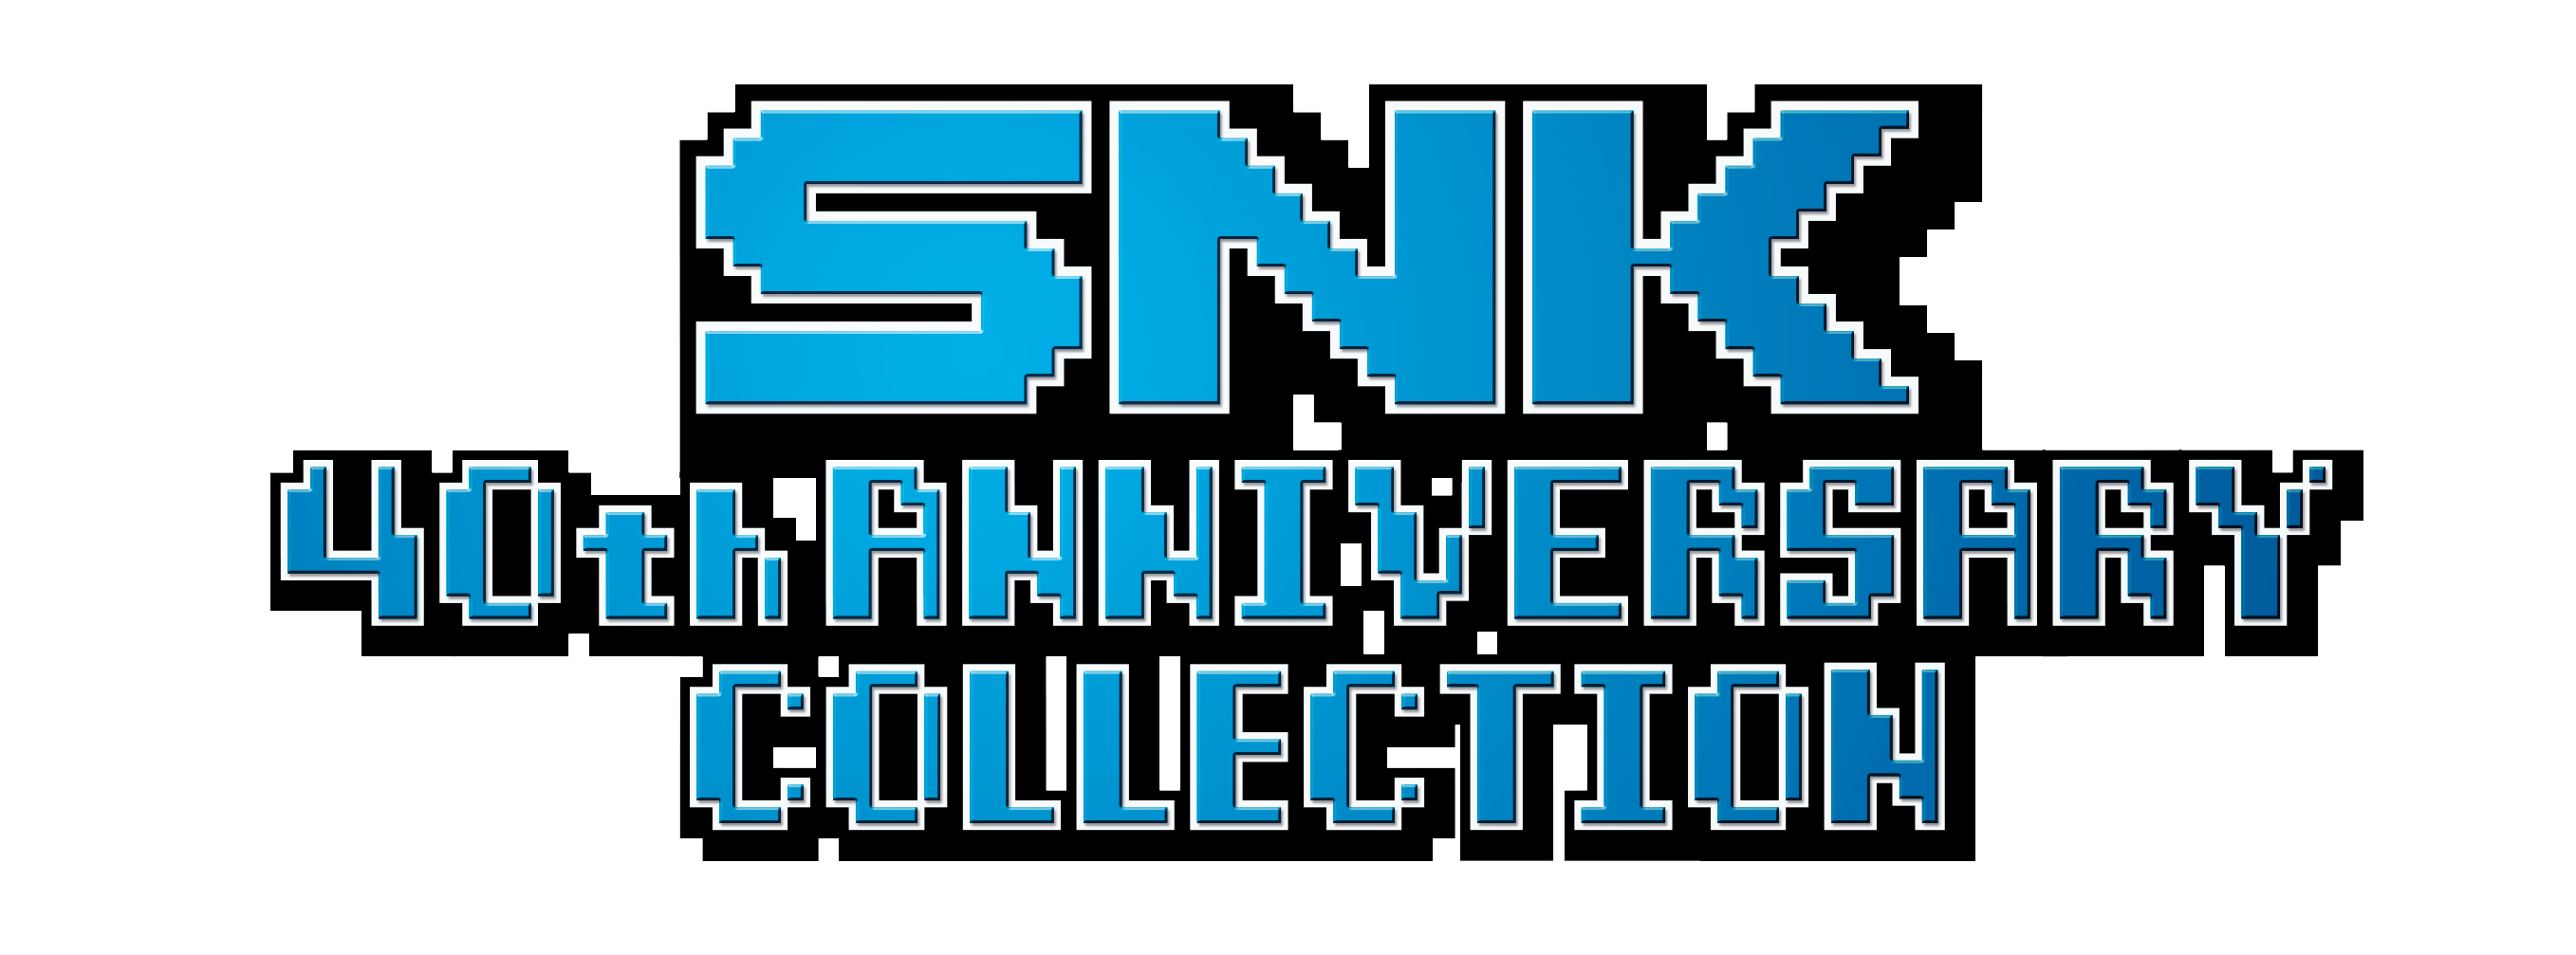 NEWS – SNK 40th ANNIVERSARY COLLECTION coming to PS4 in March – Trailer Here